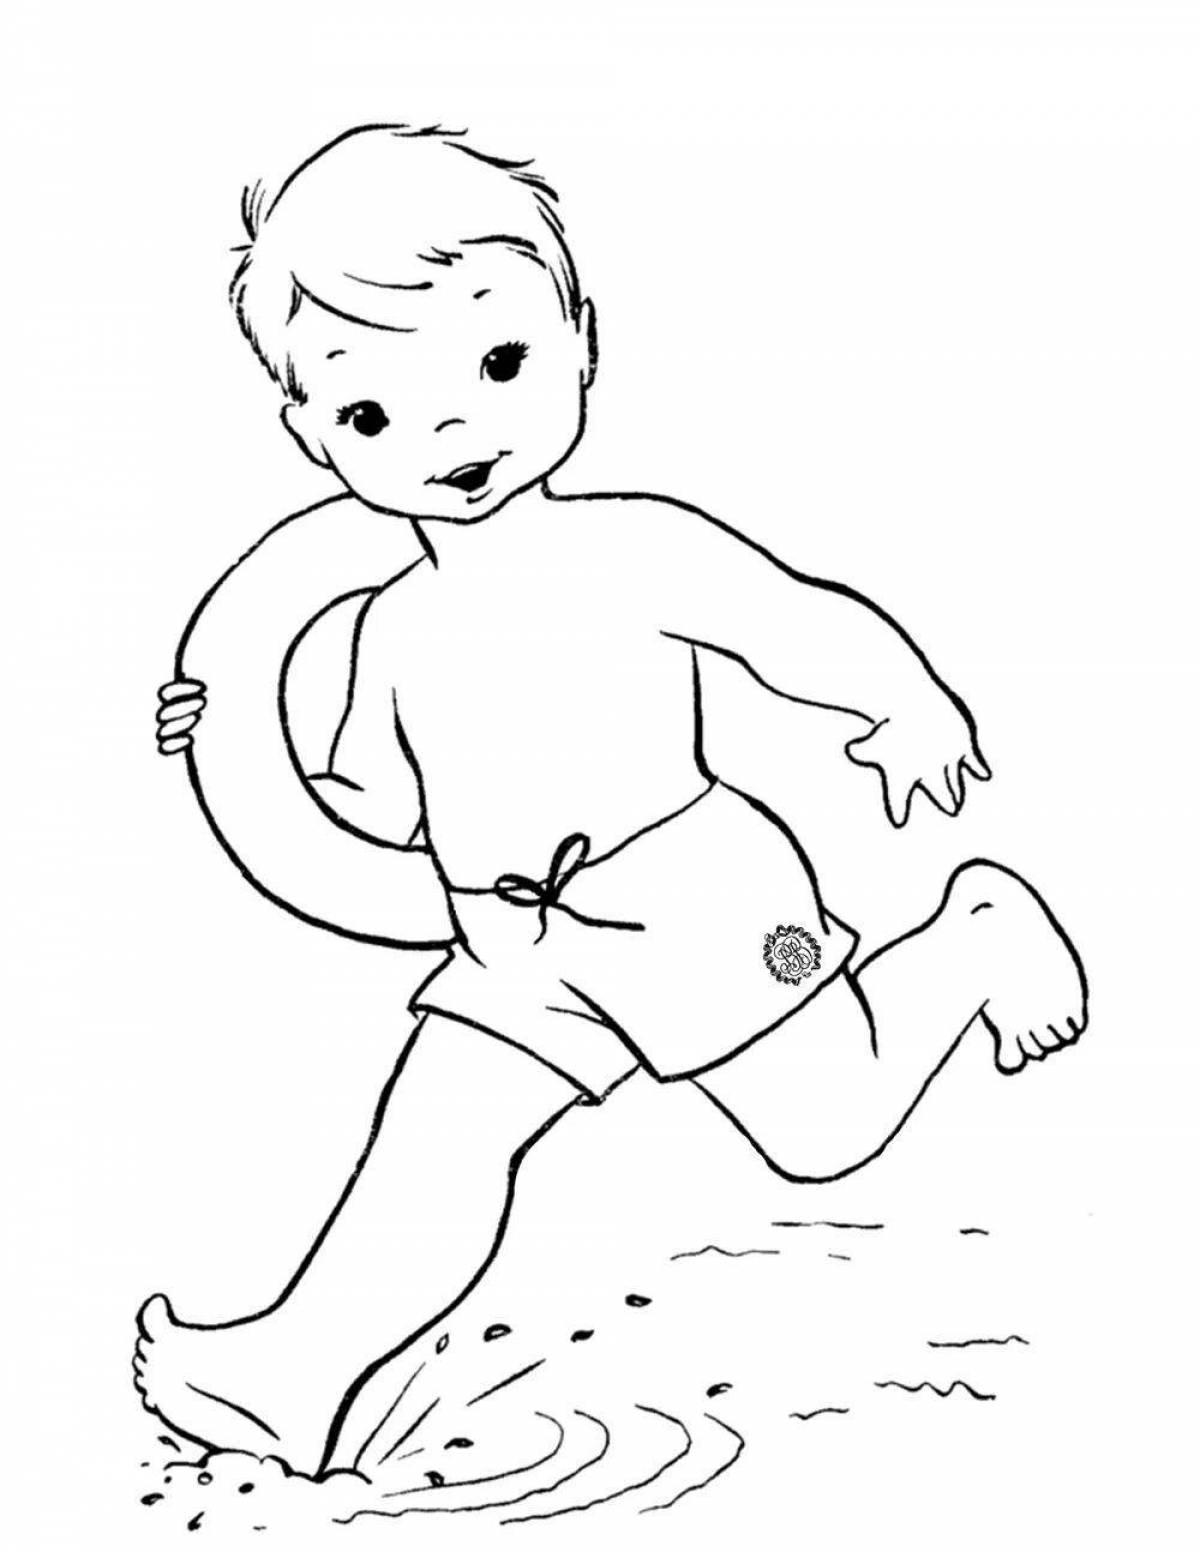 Inspirational water safety coloring page